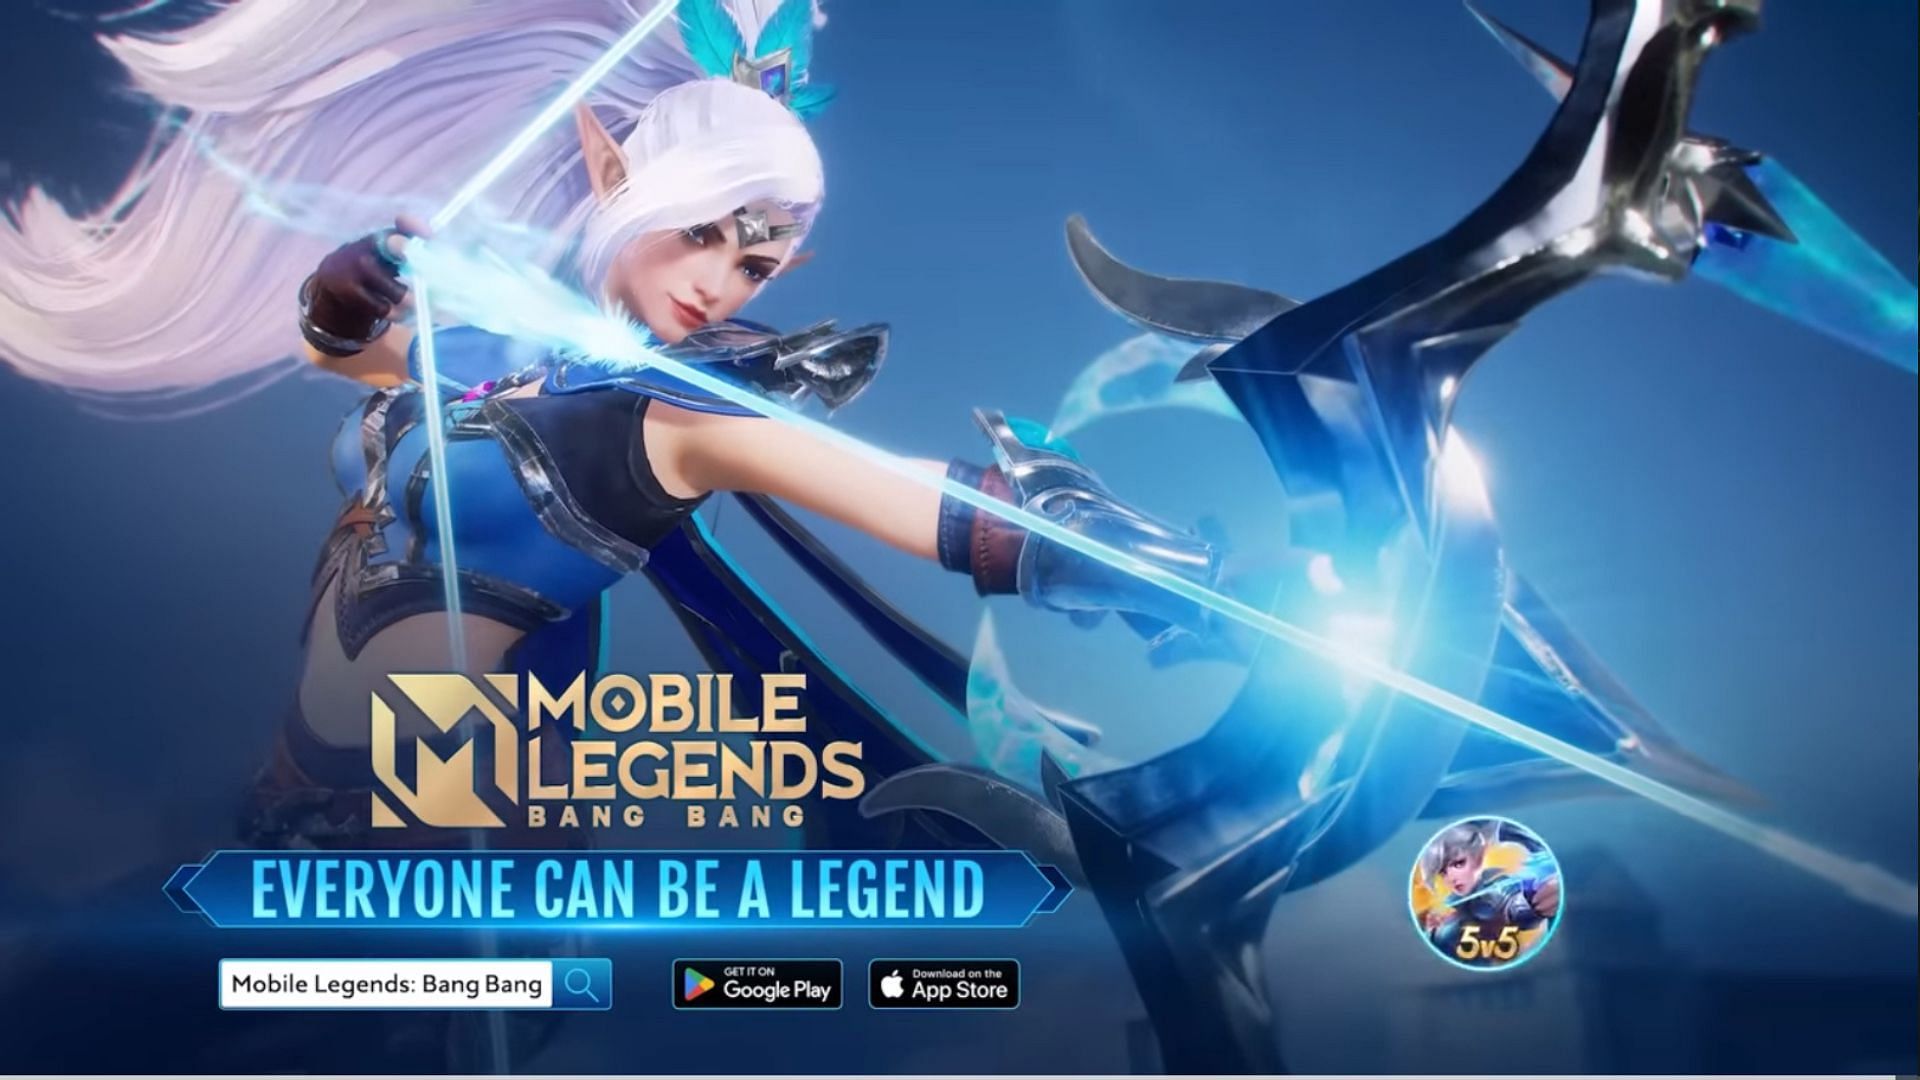 Southeast Asian legends highlighted in App Store's 'Mobile Legends